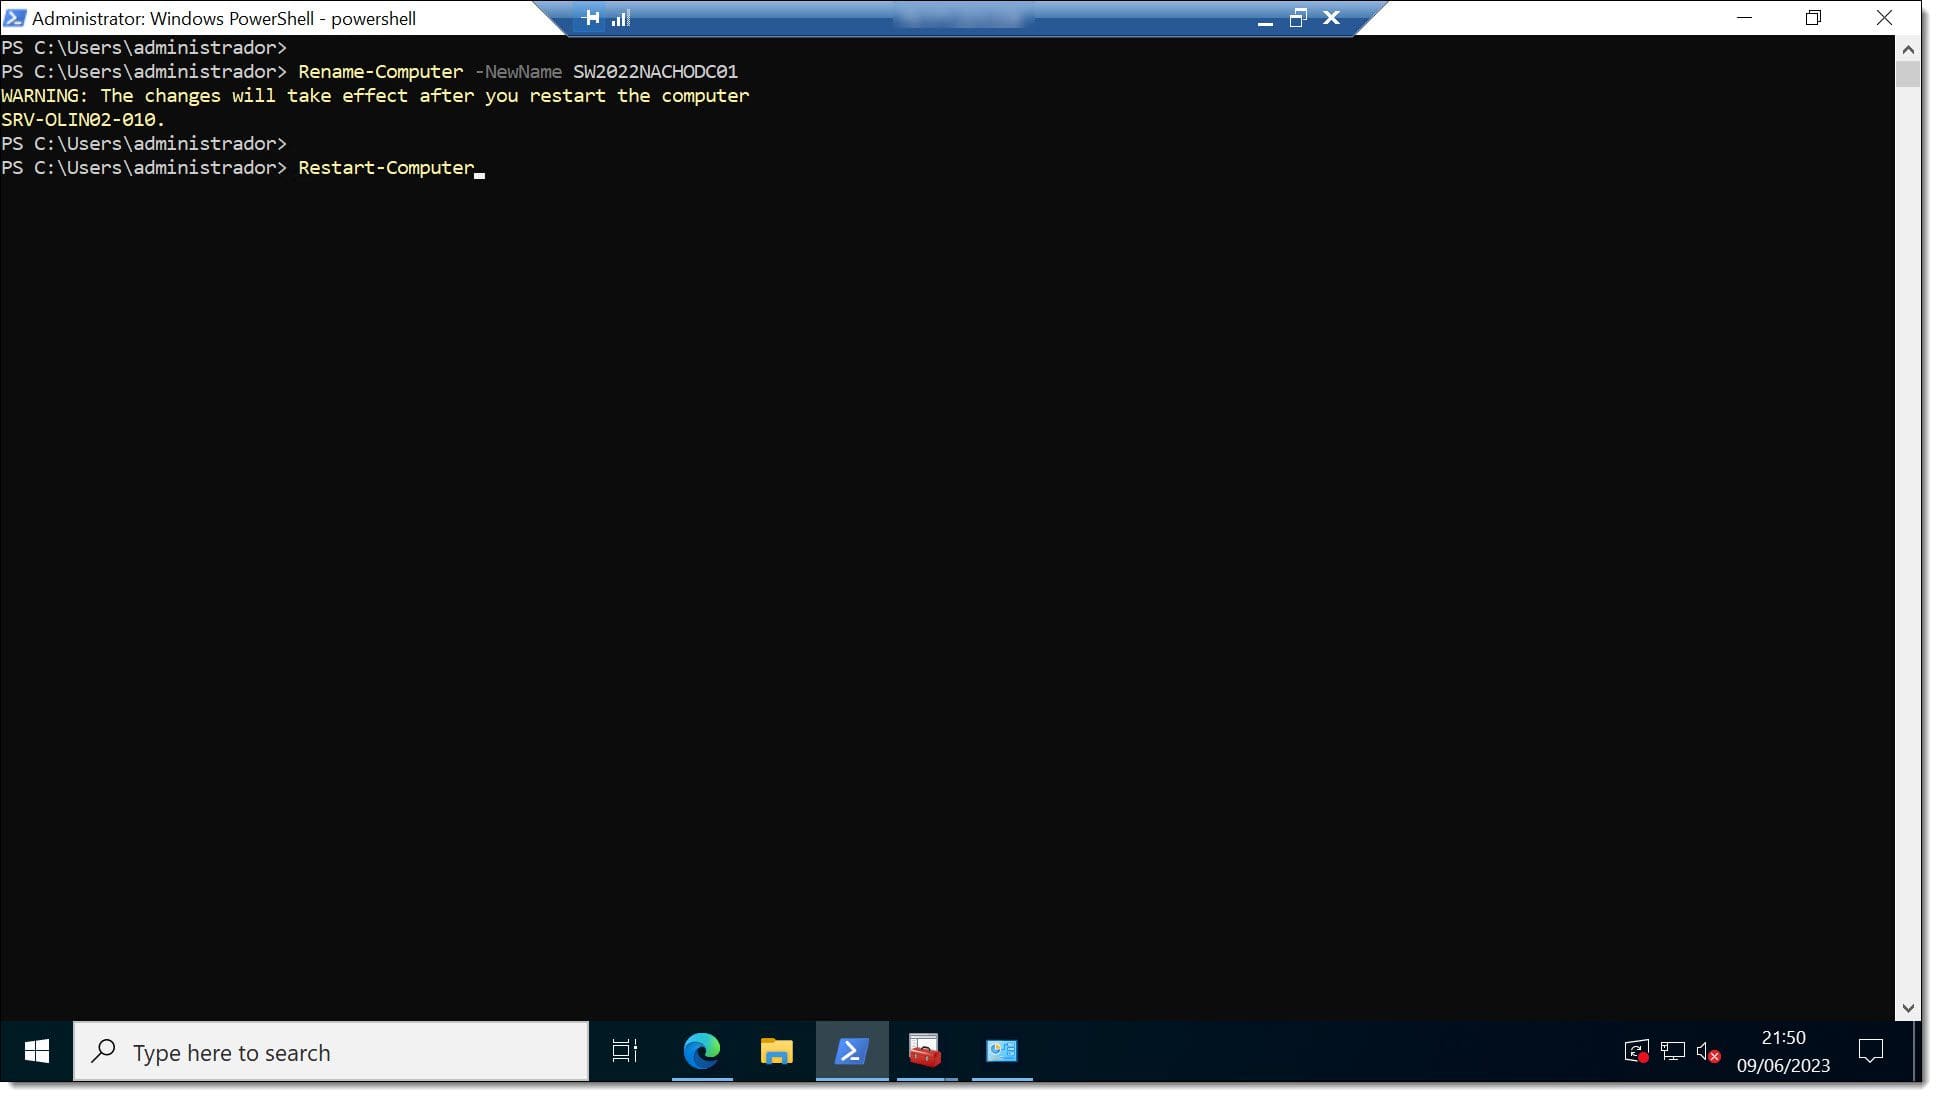 Part 1 - Renaming and restarting the server using PowerShell